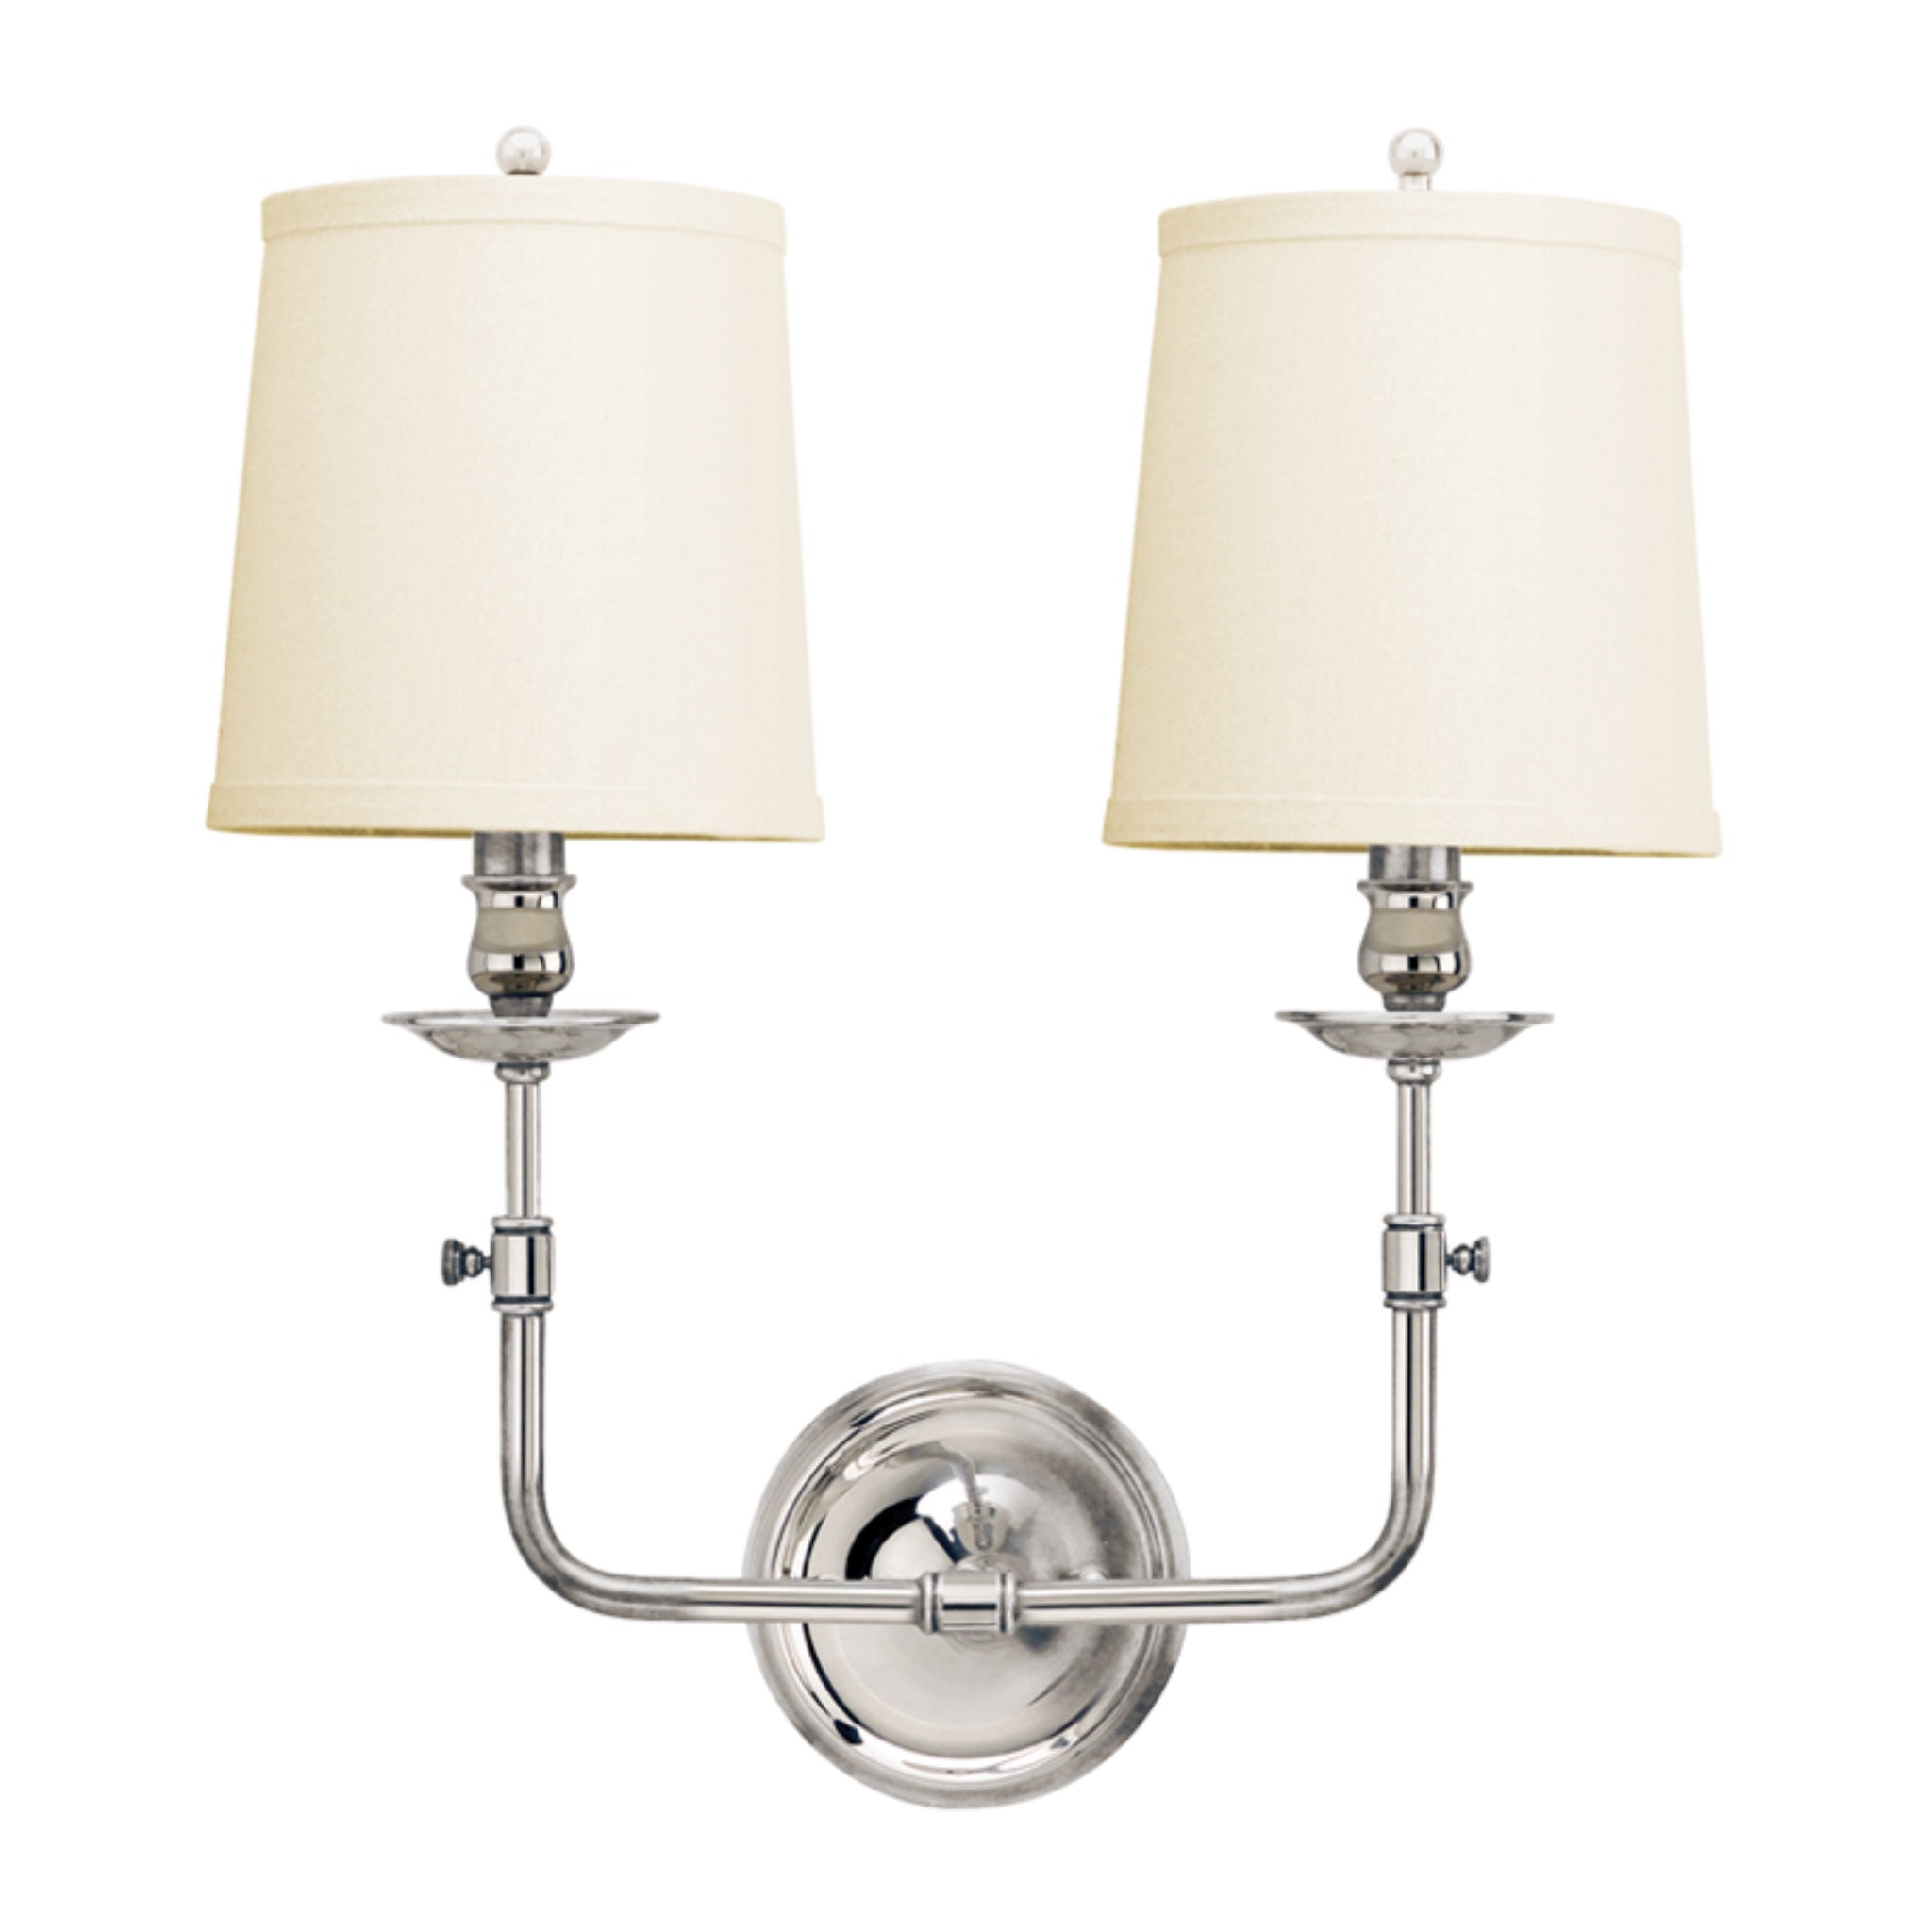 Logan 2 Light Wall Sconce in Polished Nickel